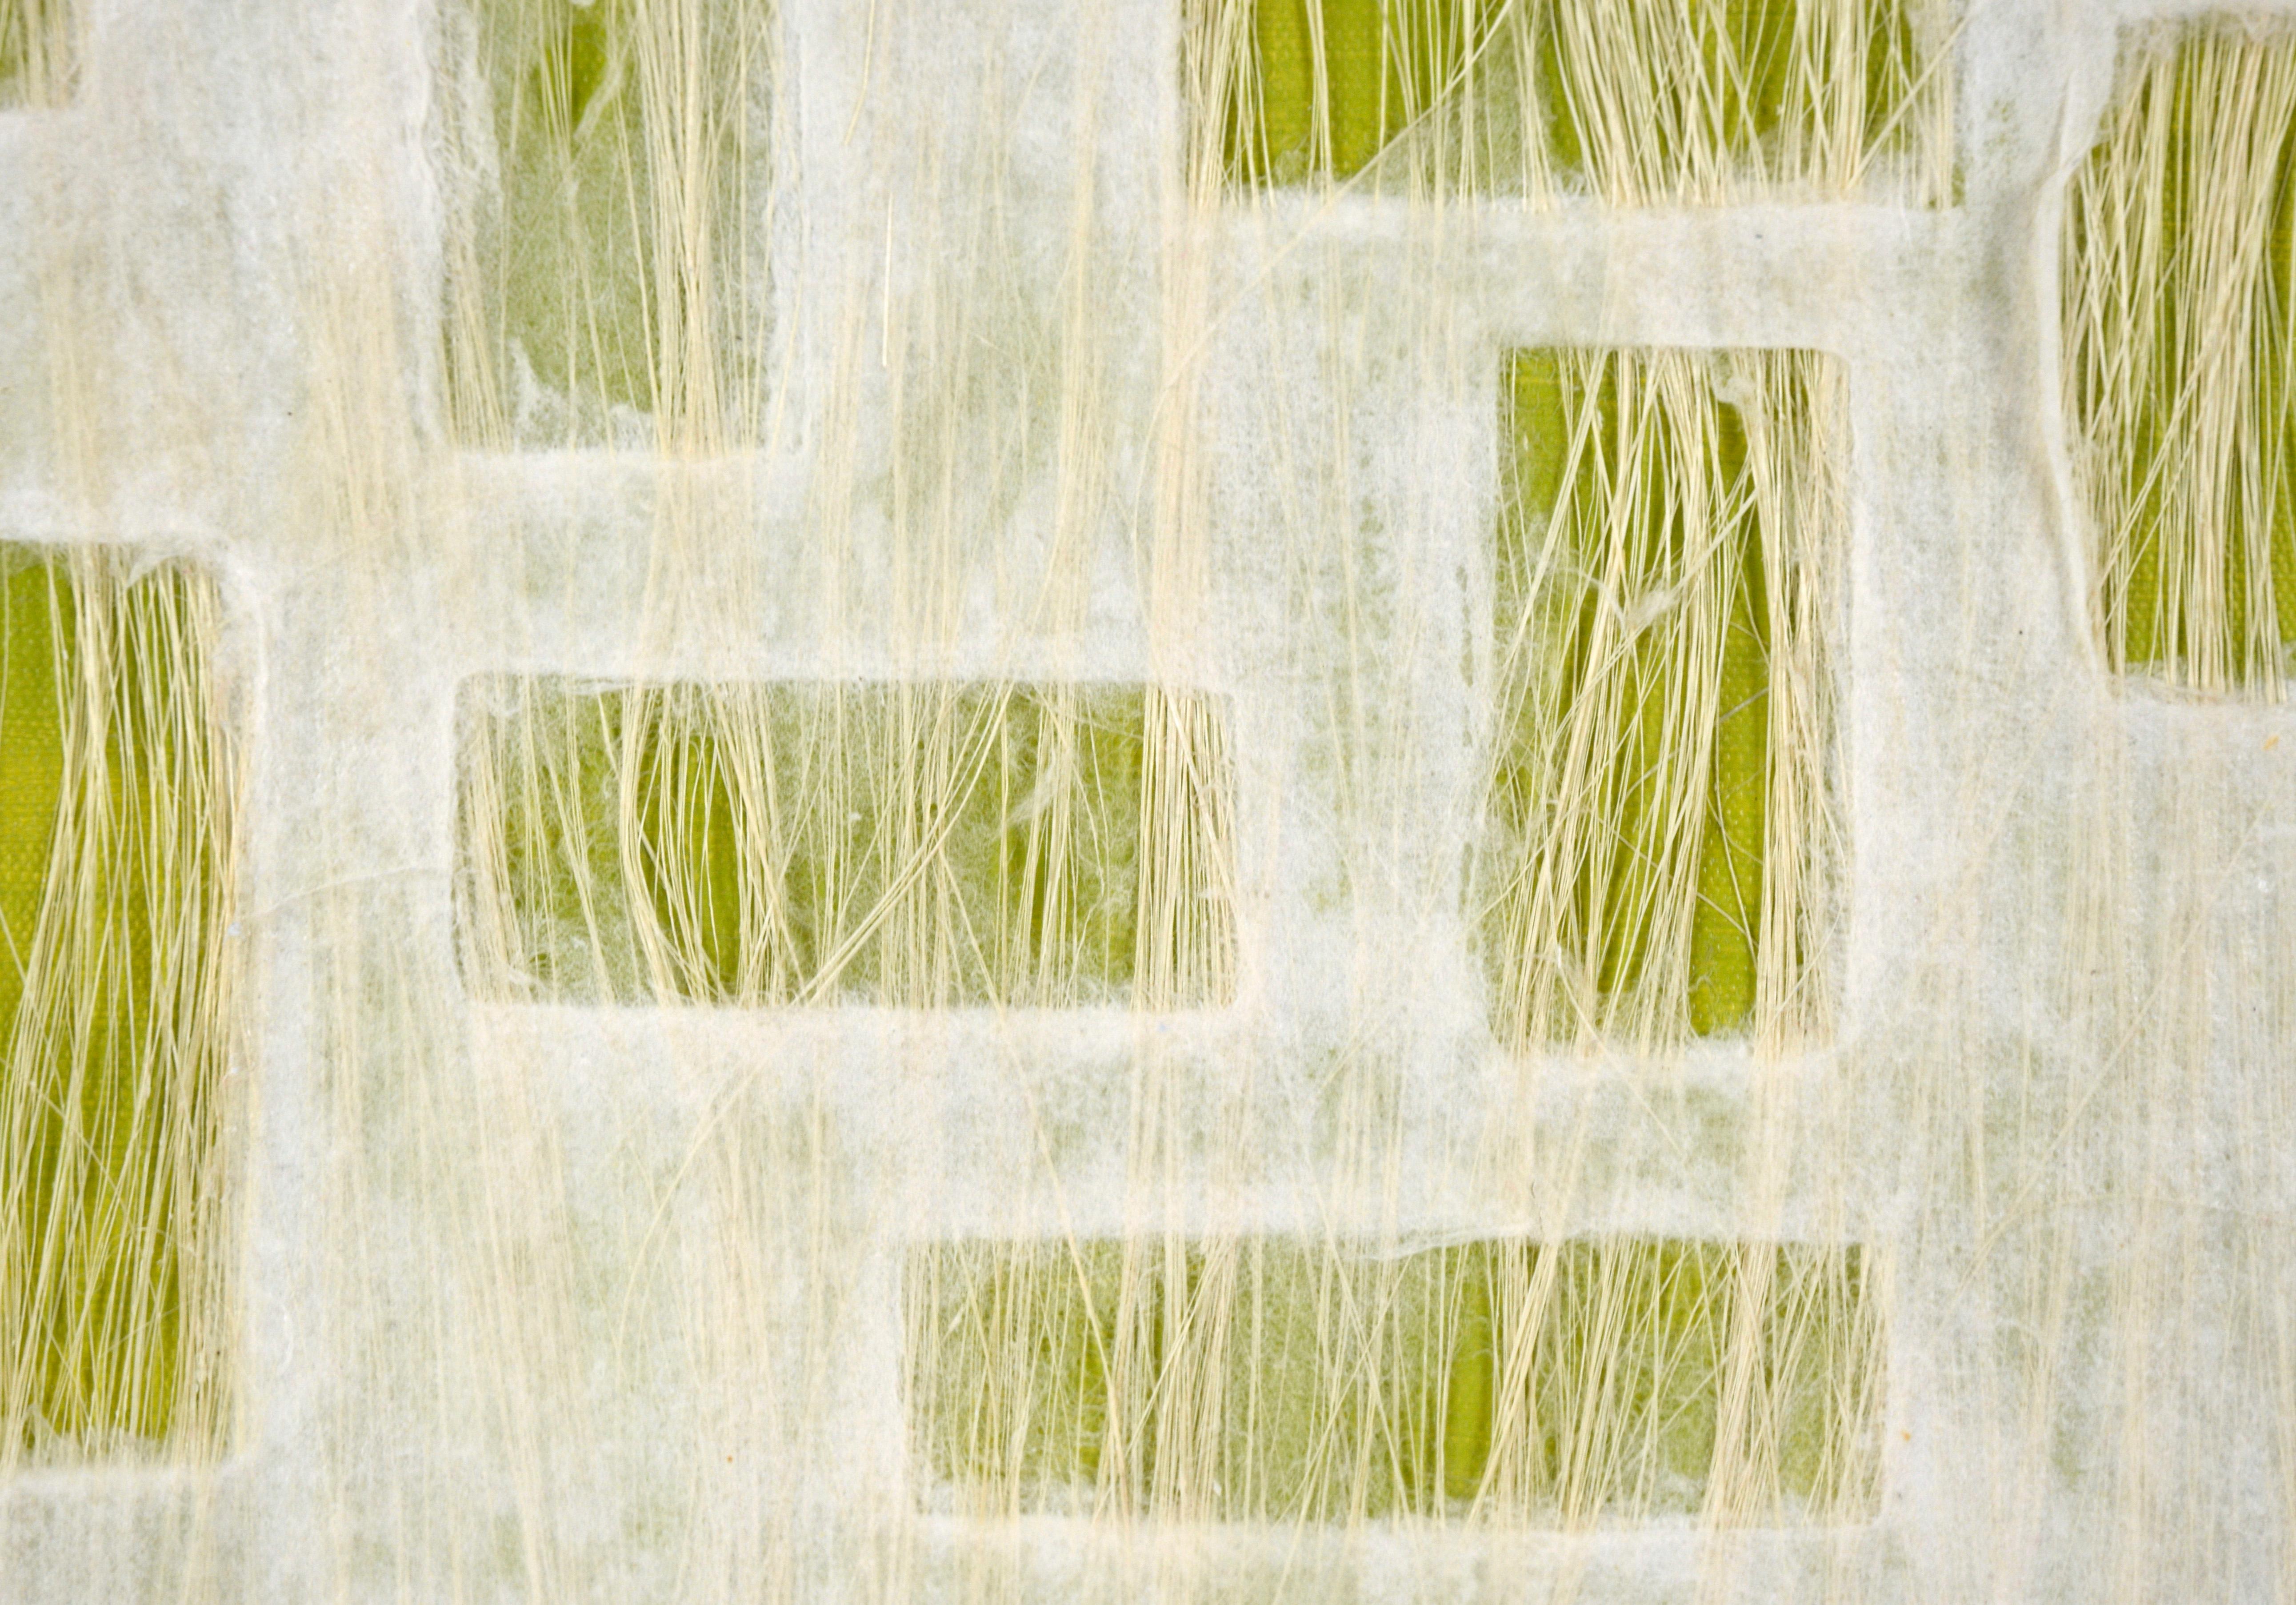 Abstract Geometric Composition with Paper, Fibers, and Acrylic on Canvas (Green) For Sale 1